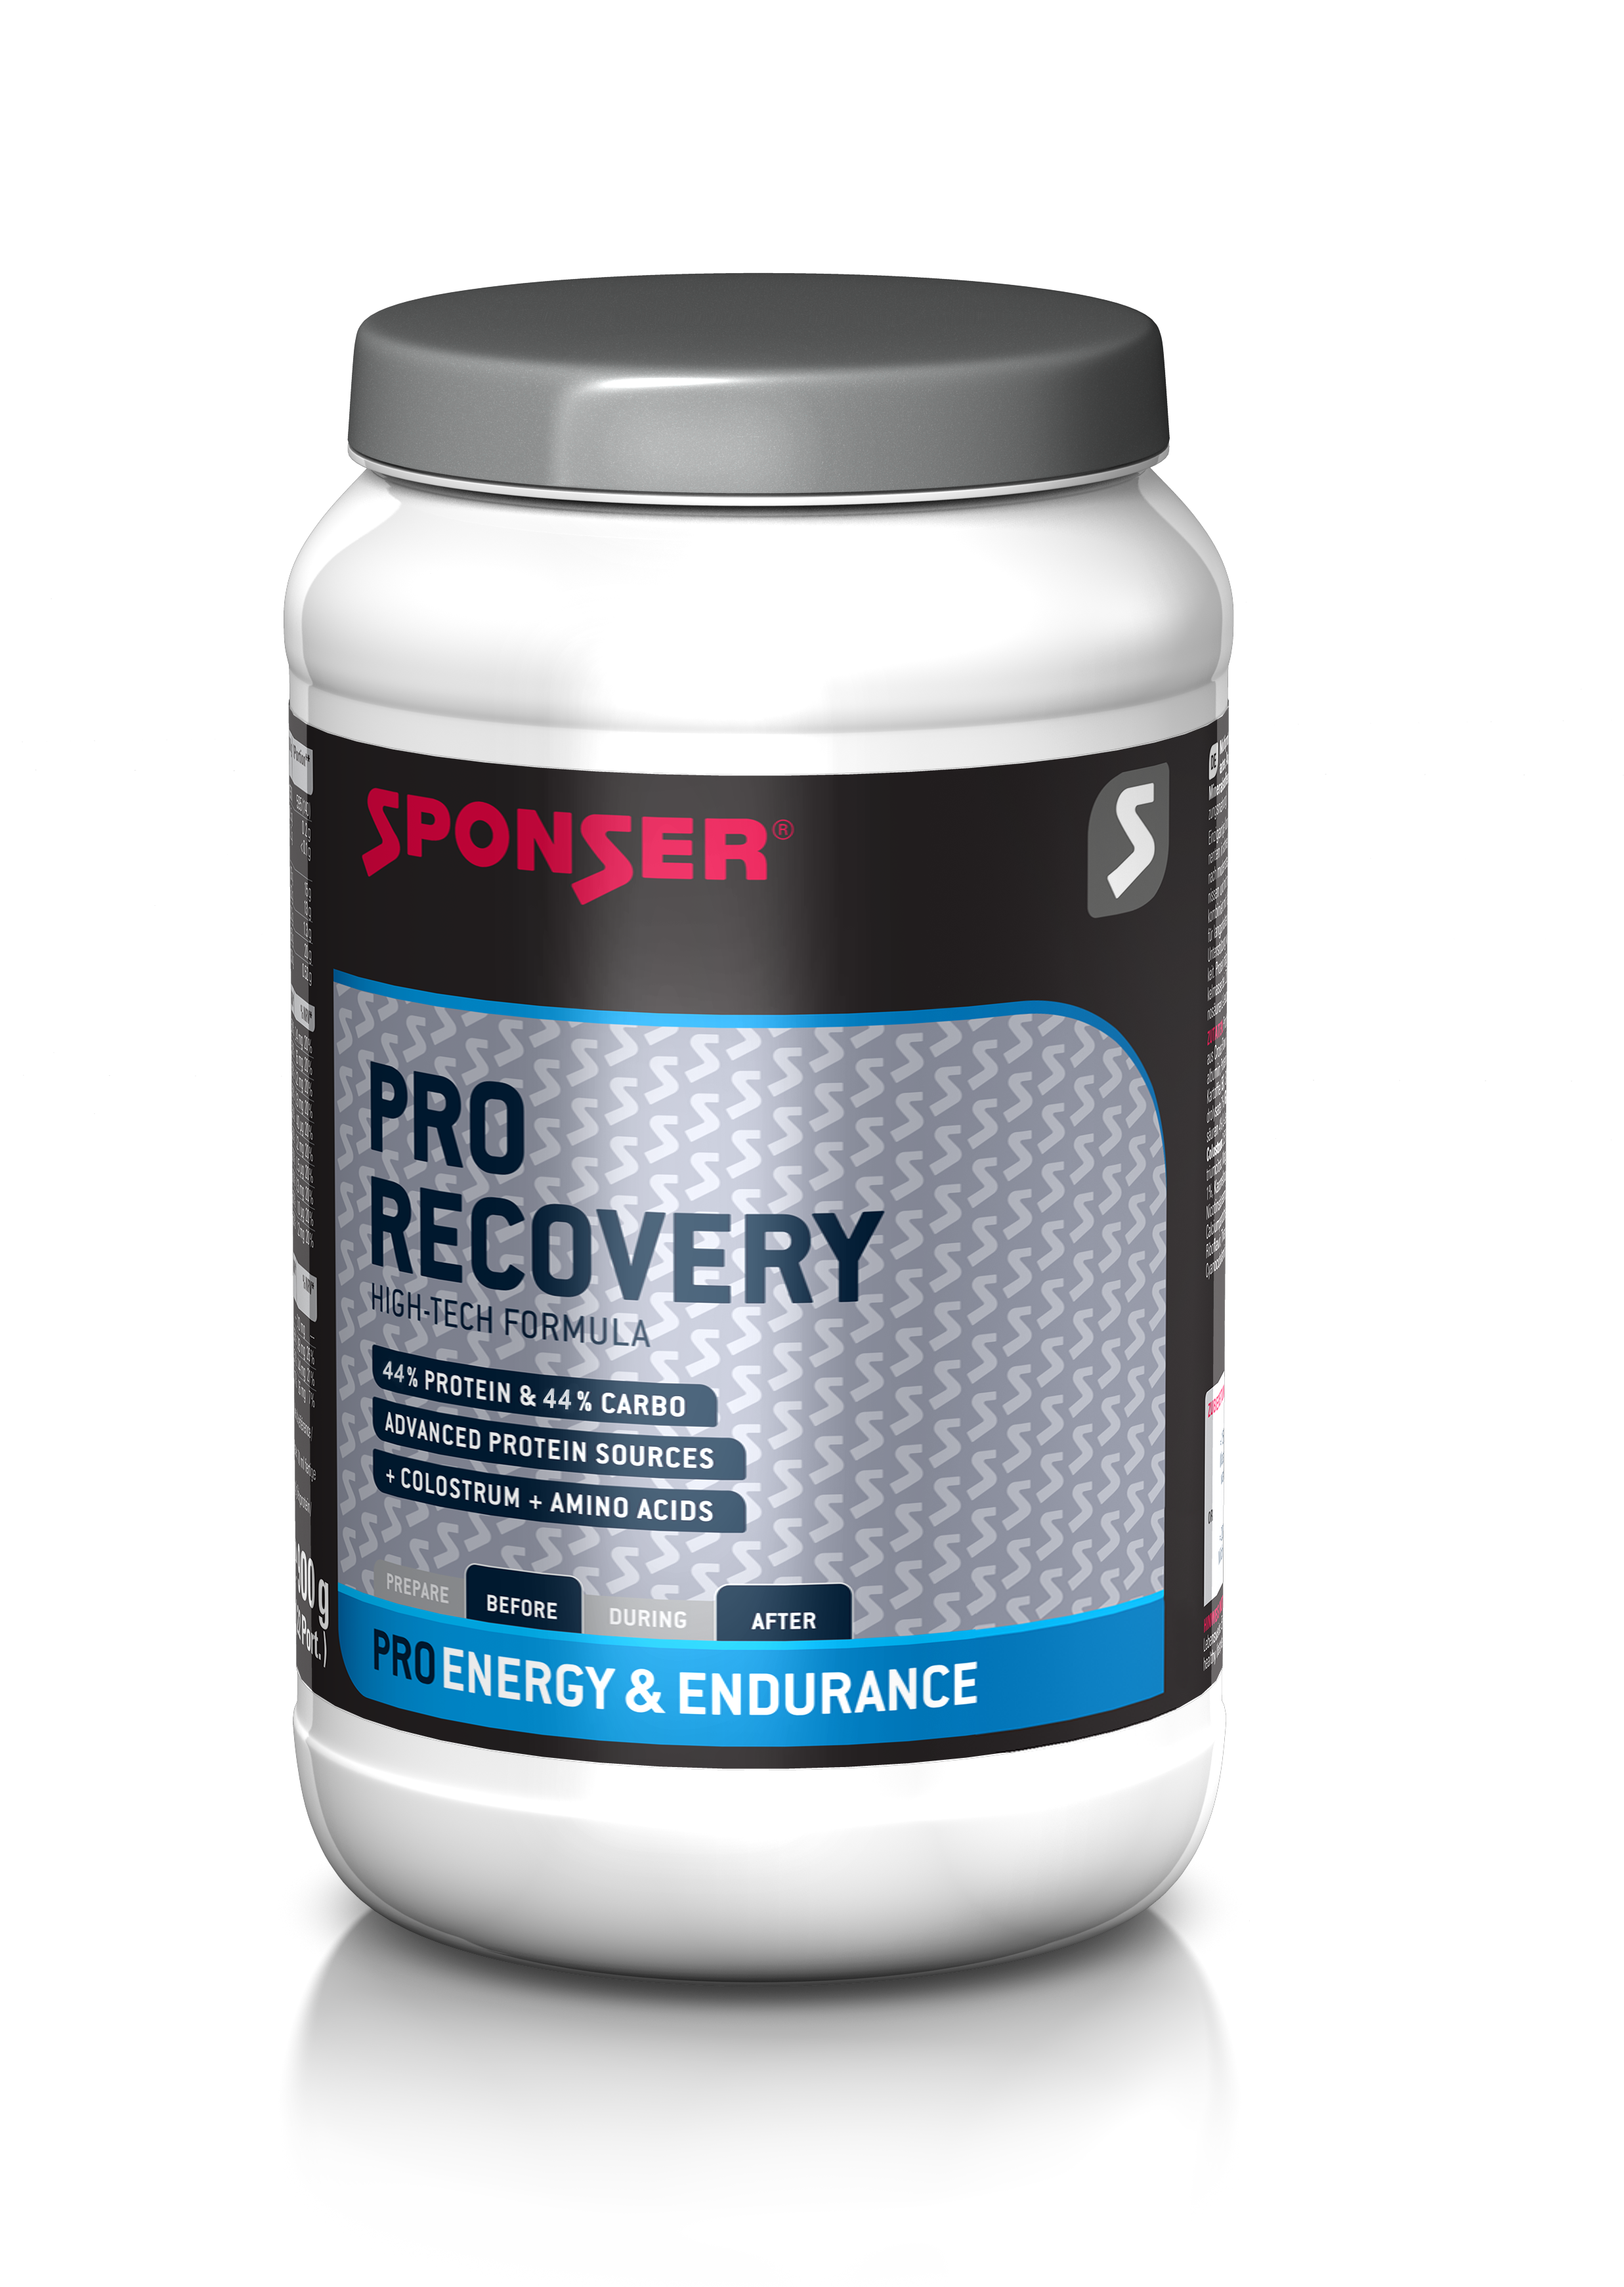 Sponser Power 44/44 Pro Recovery Chocolate, 800 g.